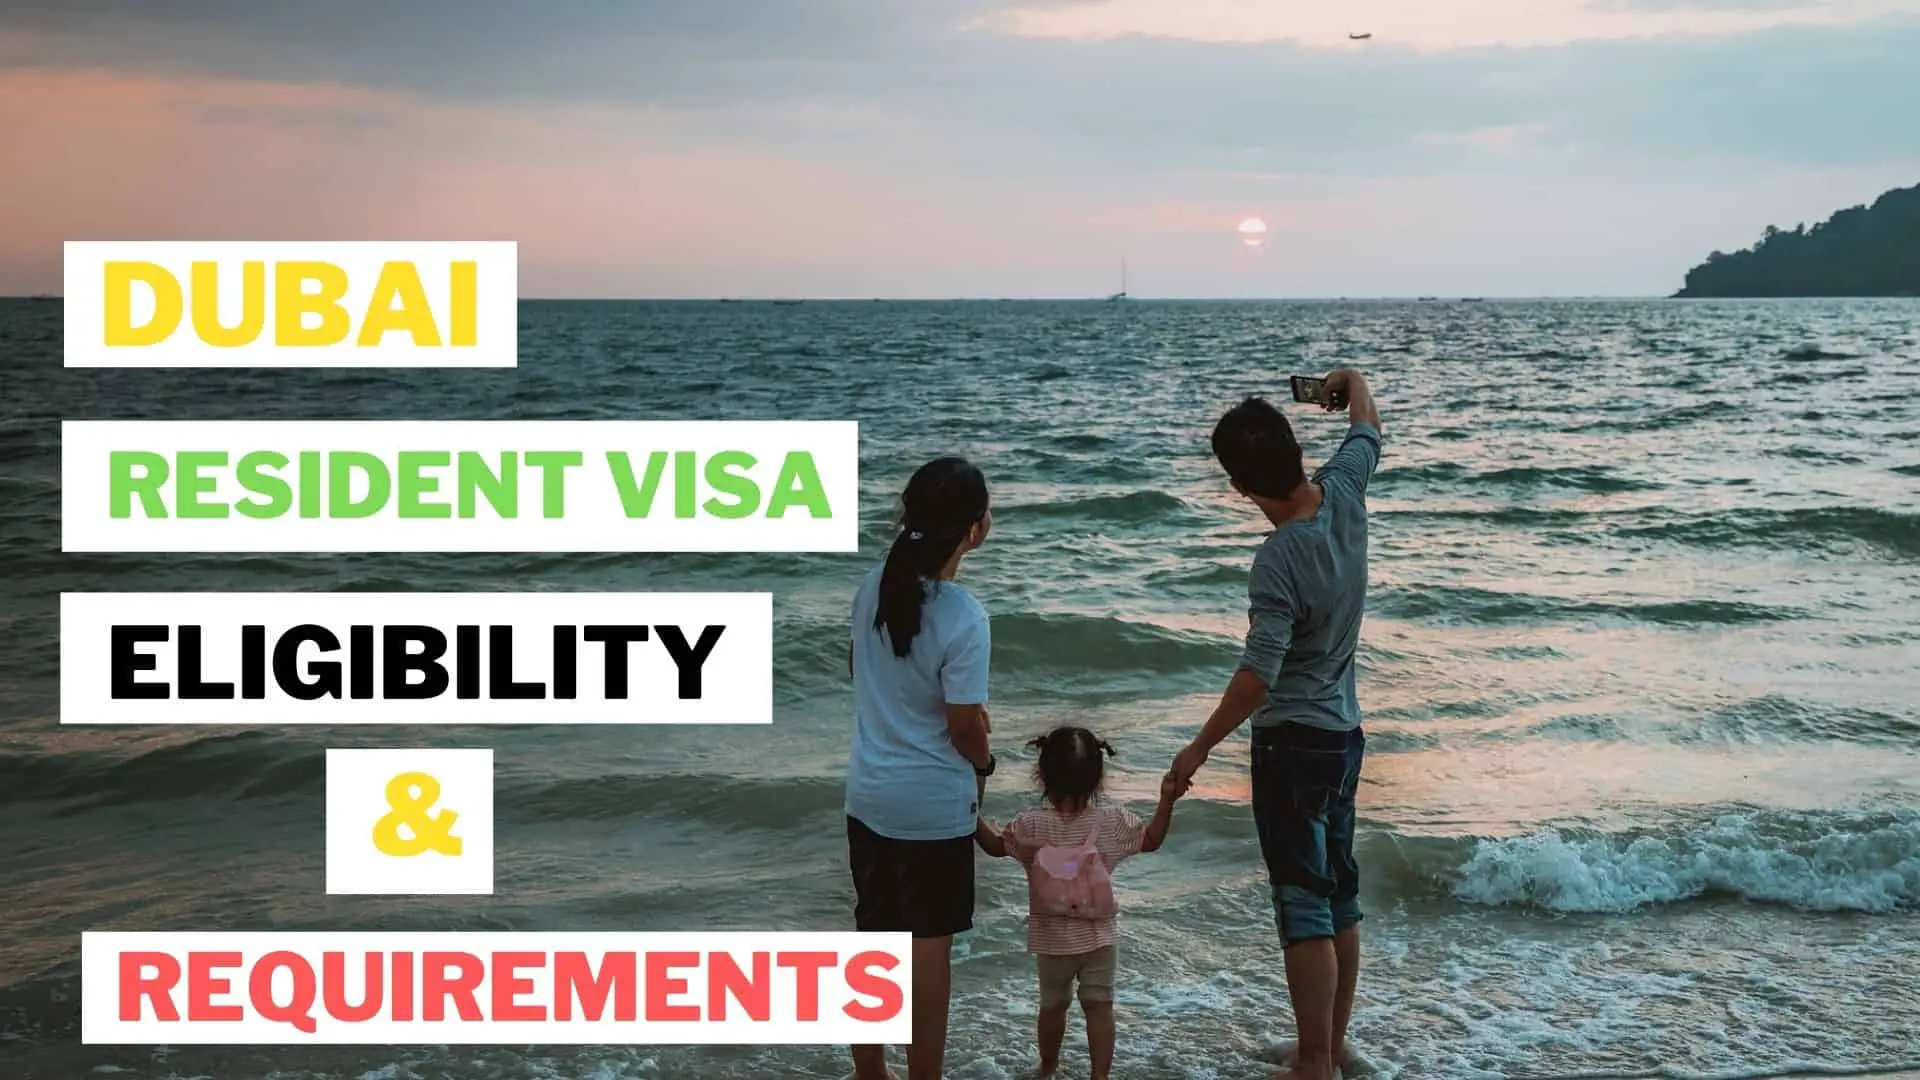 Dubai resident visa, eligibility and requirements